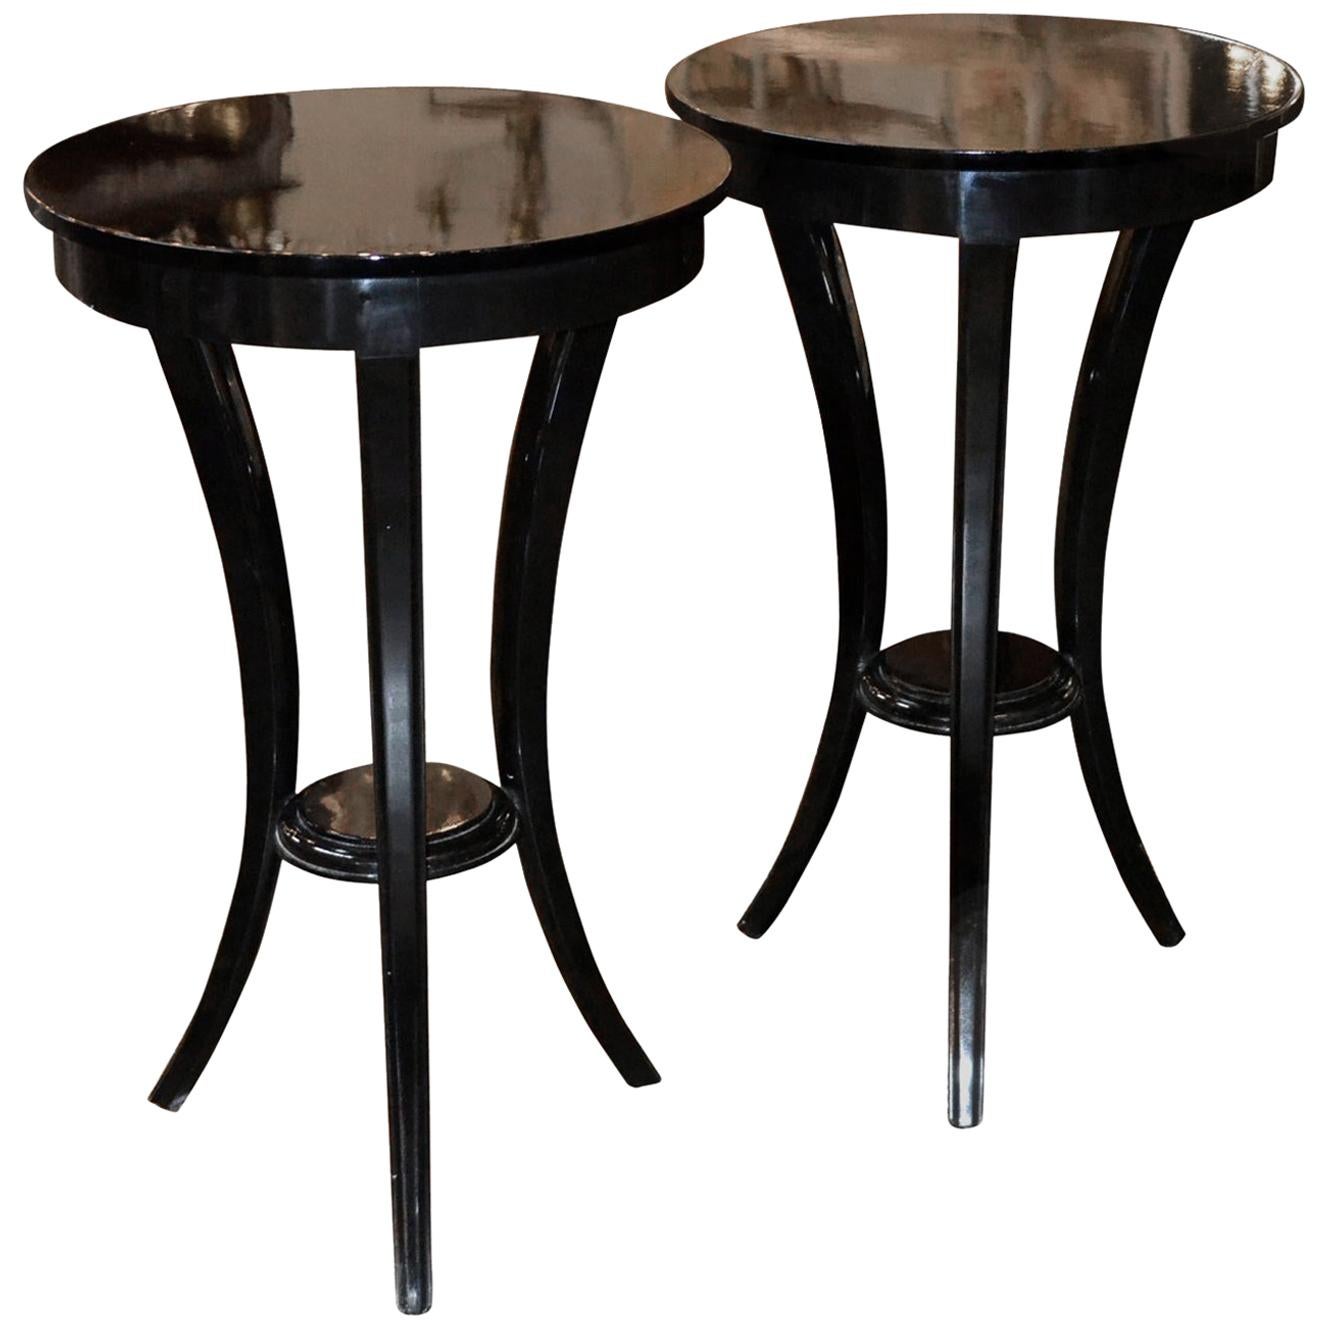 Pair of Biedermeier Style Black Lacquered Side Tables